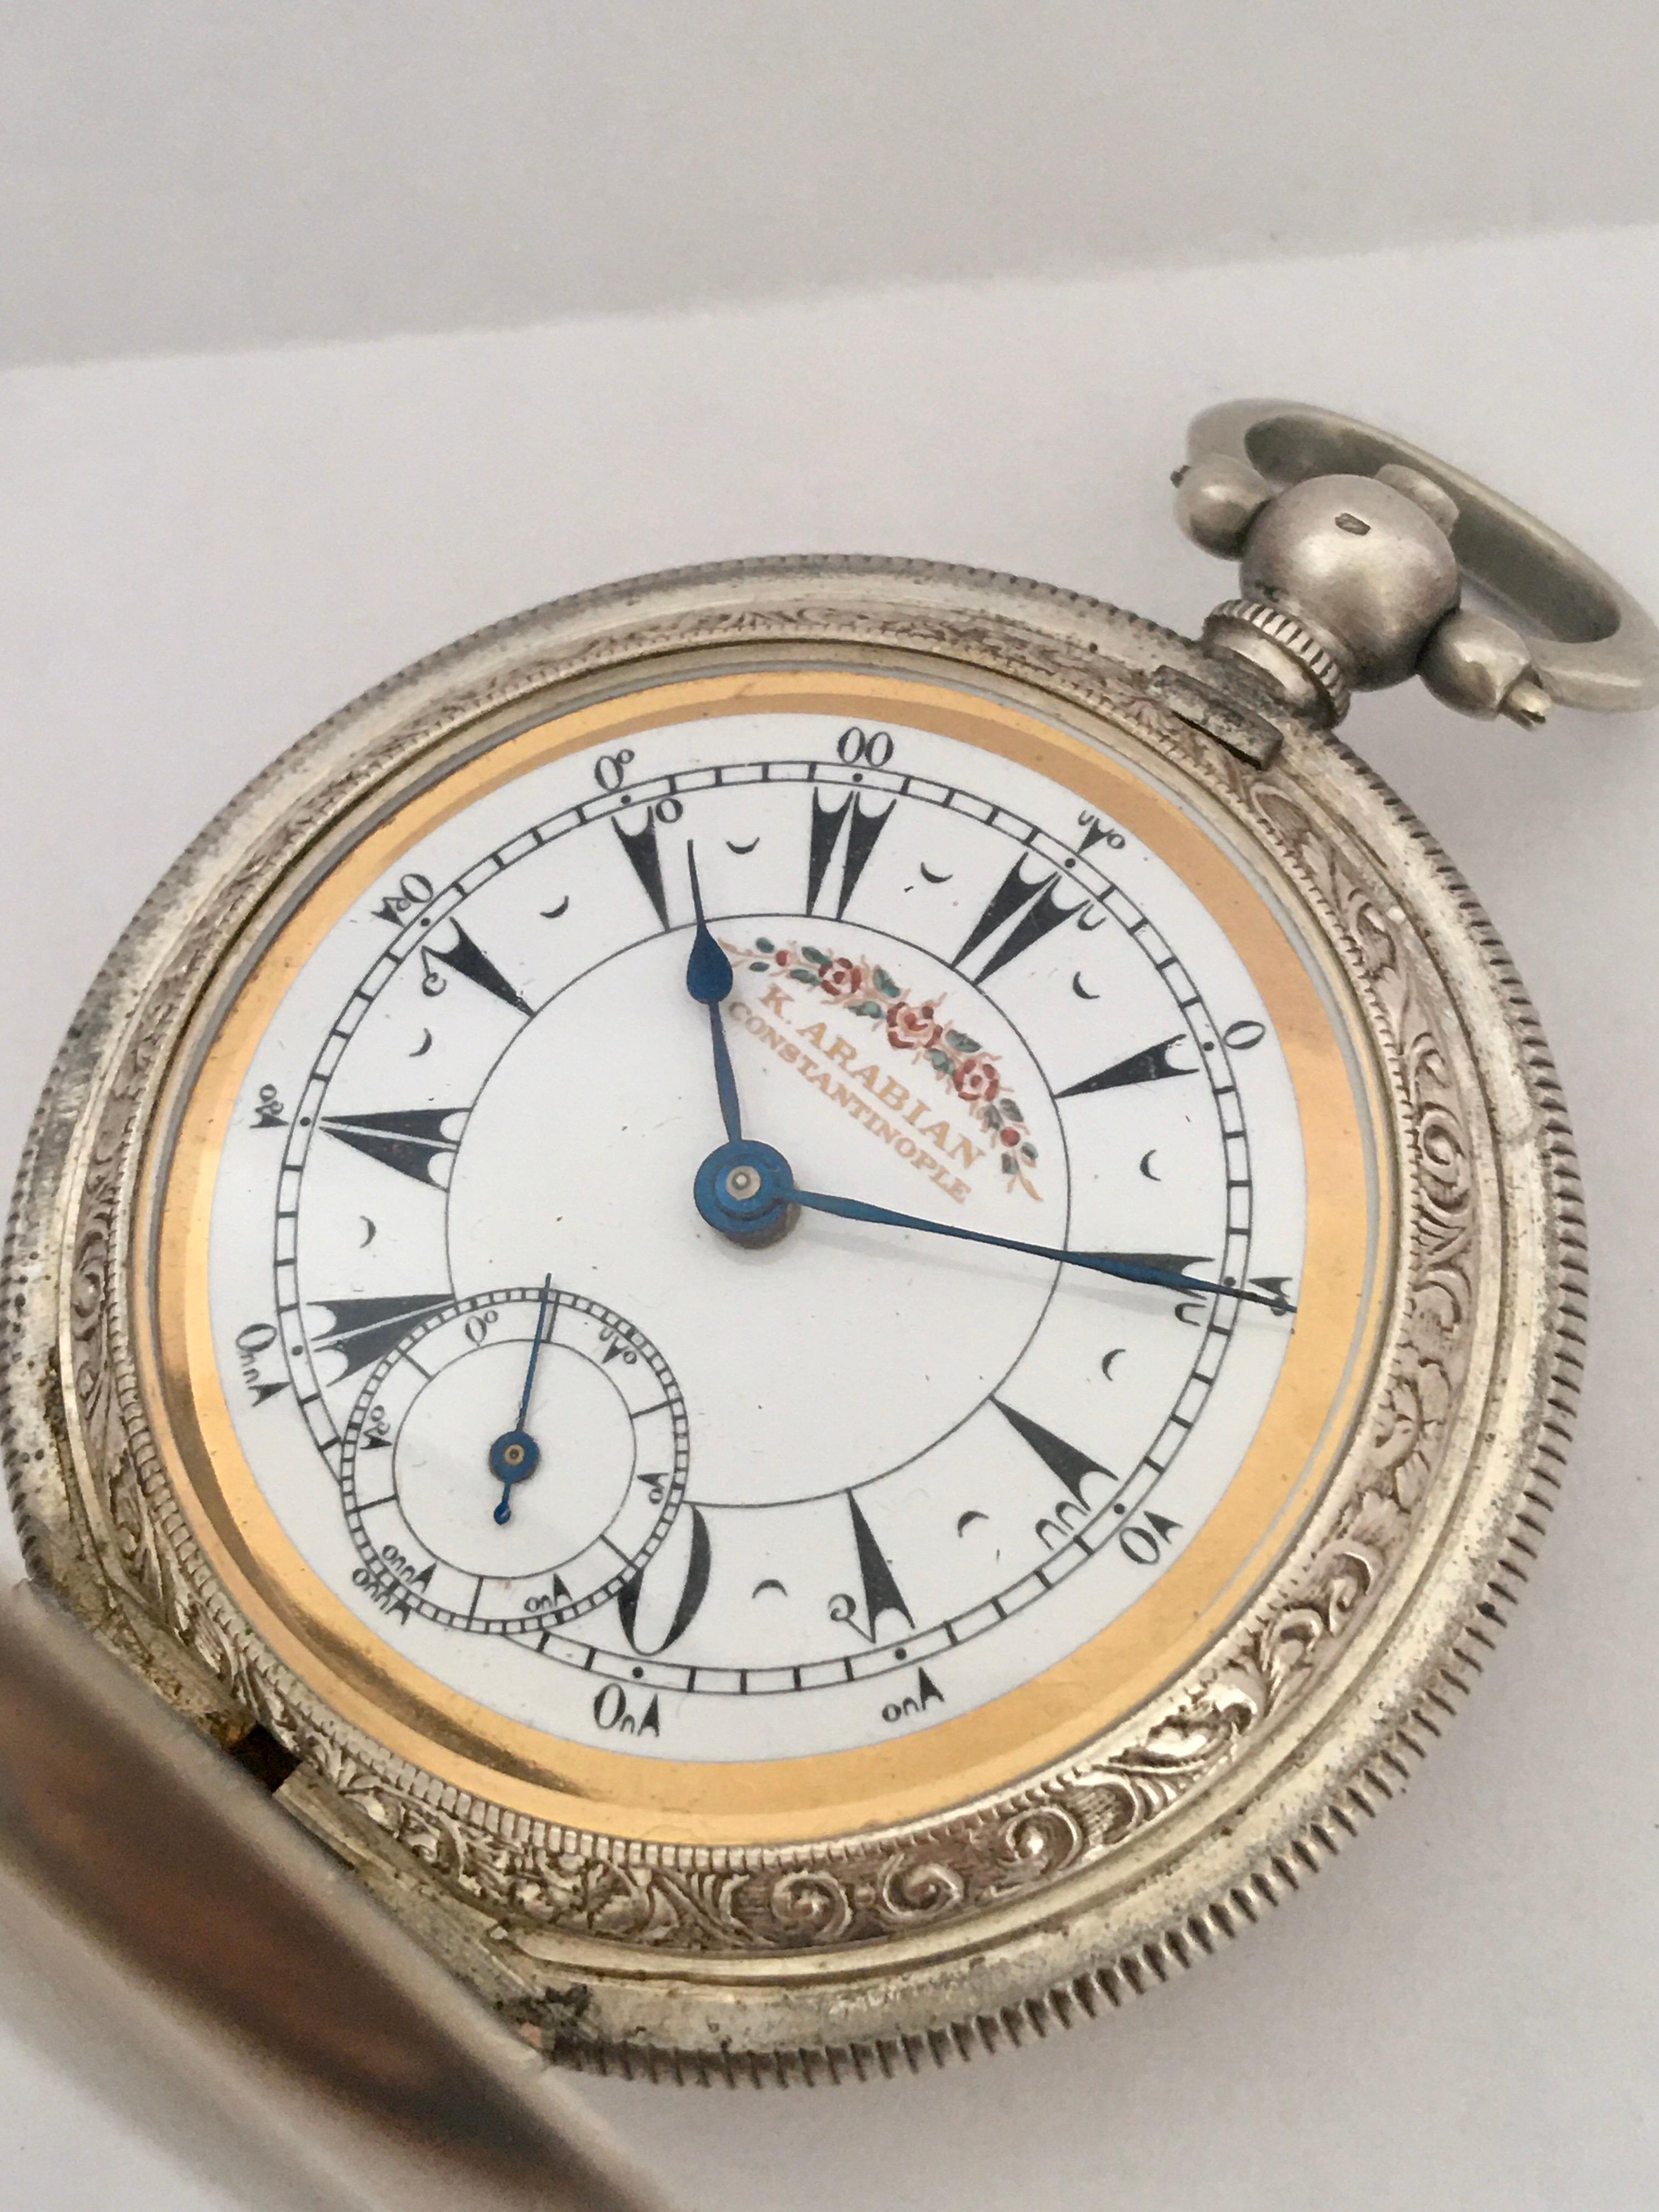 This beautiful full hunter silver pocket watch is working and it is ticking well. Visible signs of wearing on the silver case and the metal work cover as shown.

Please study the images carefully as form part of the description.

